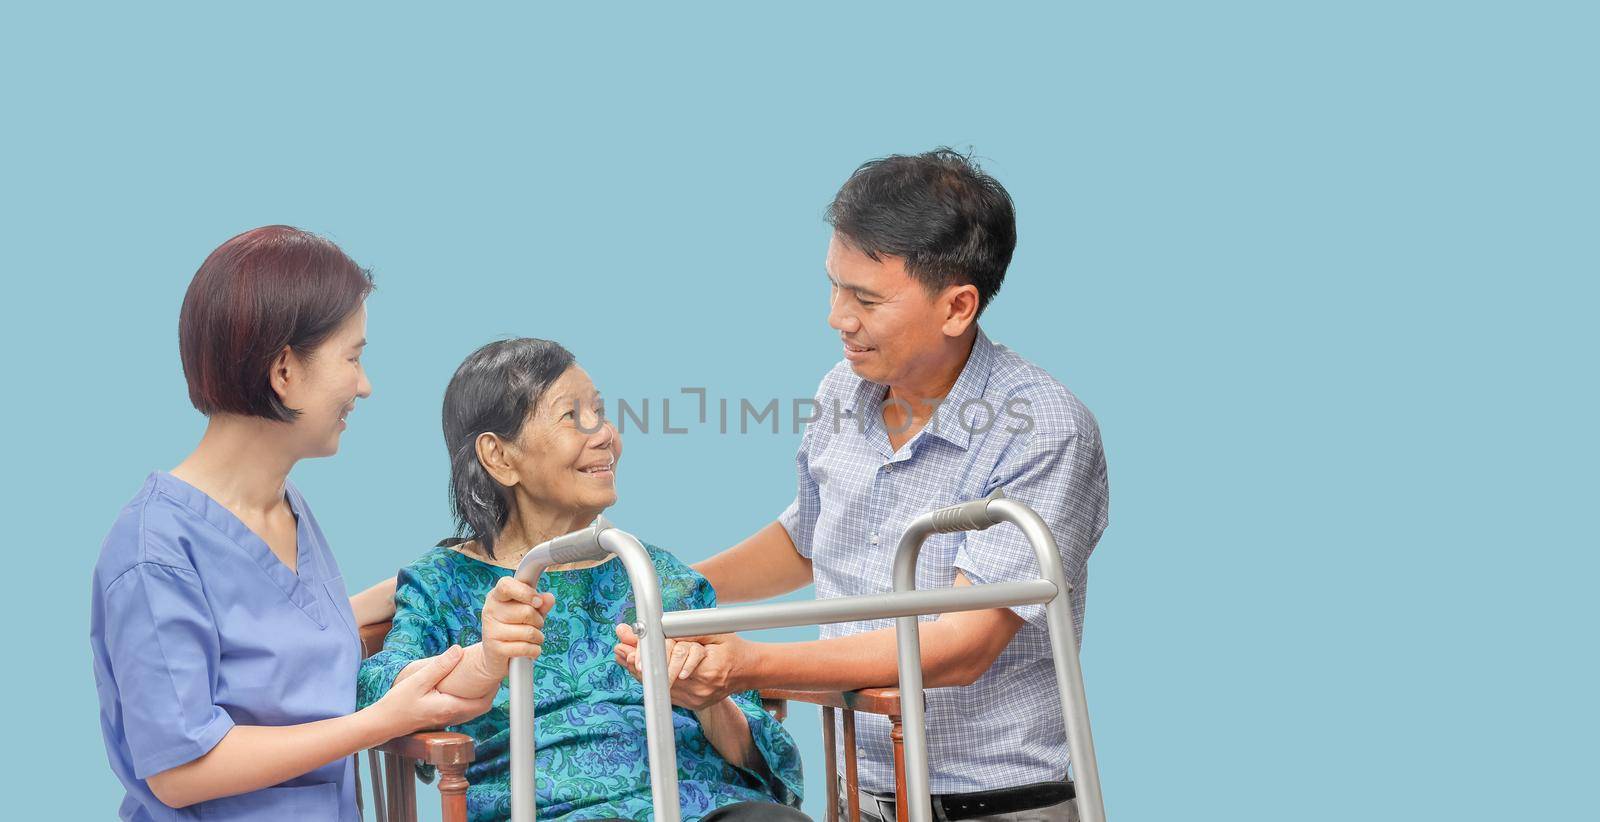 Son looking after elderly mother on wheelchair with caregiver